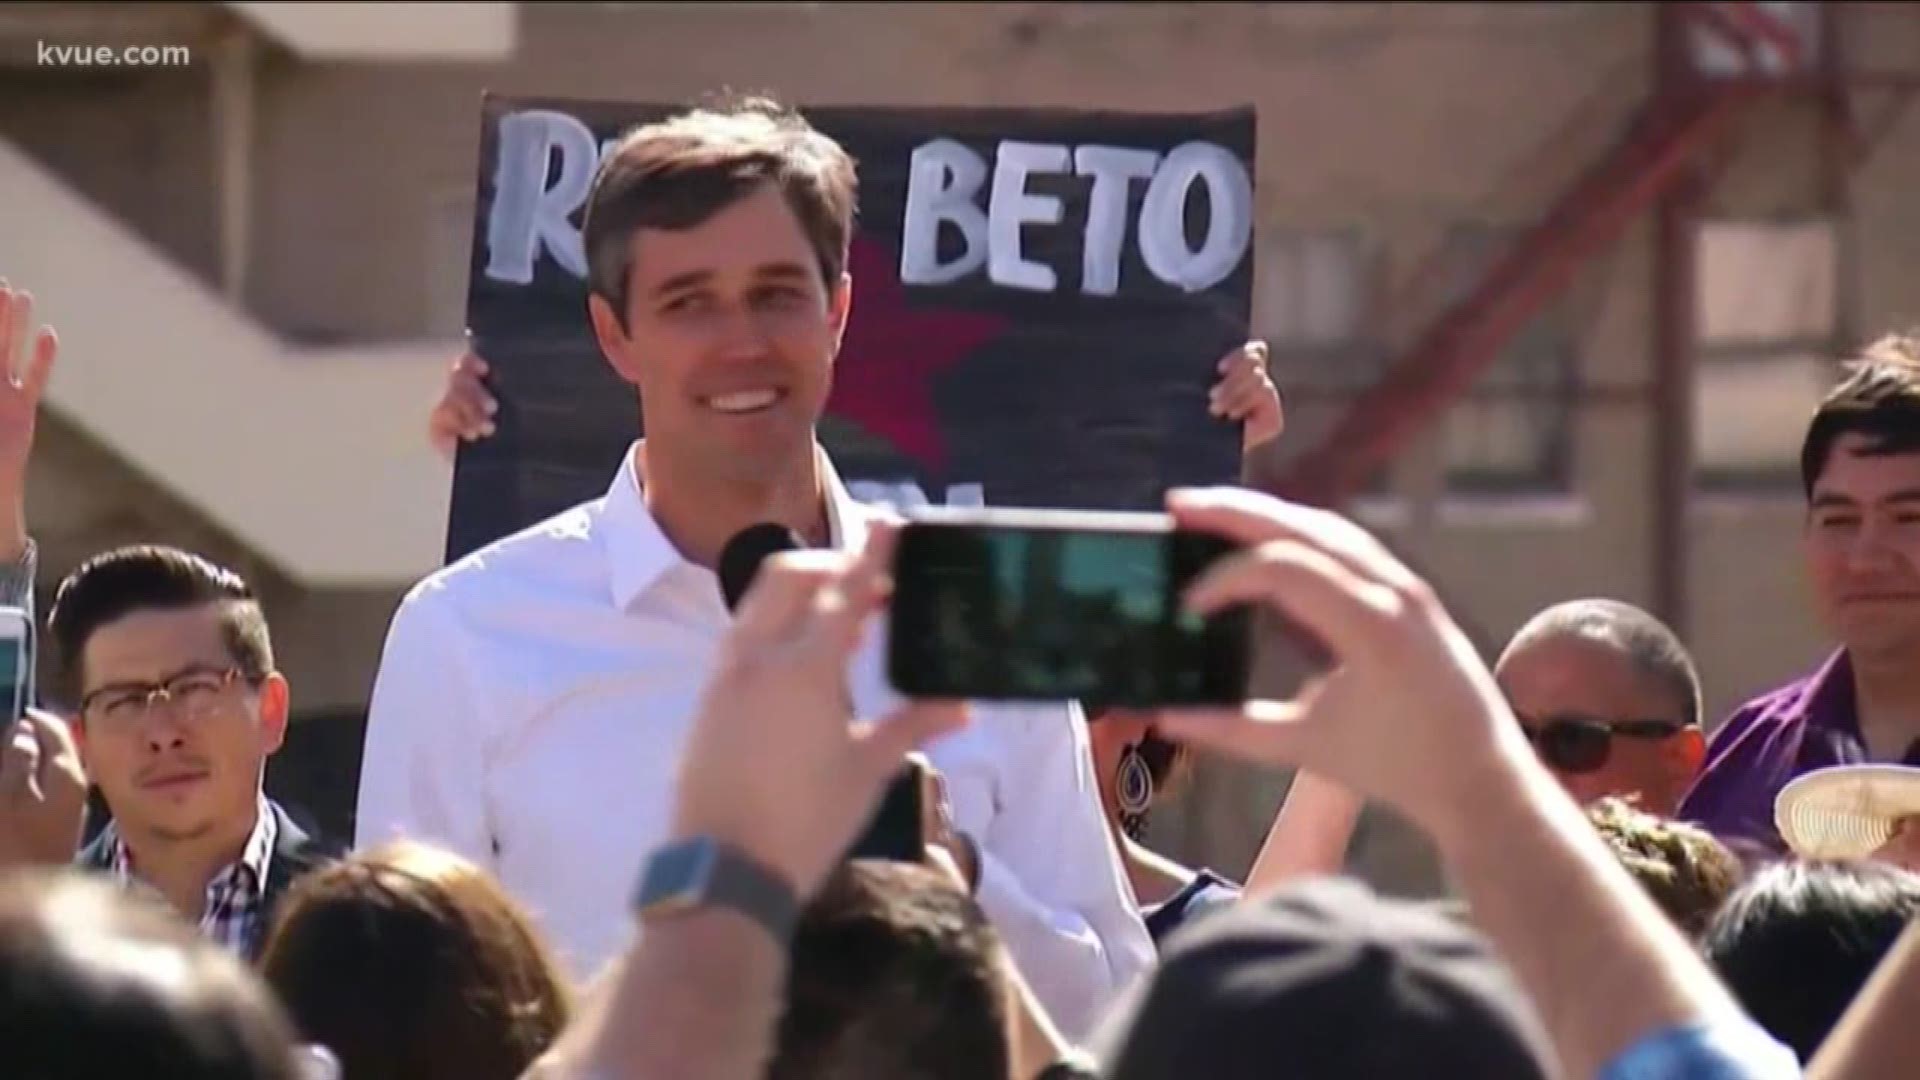 In a social media post, Democratic presidential candidate Beto O'Rourke said he recently learned his family owned slaves.